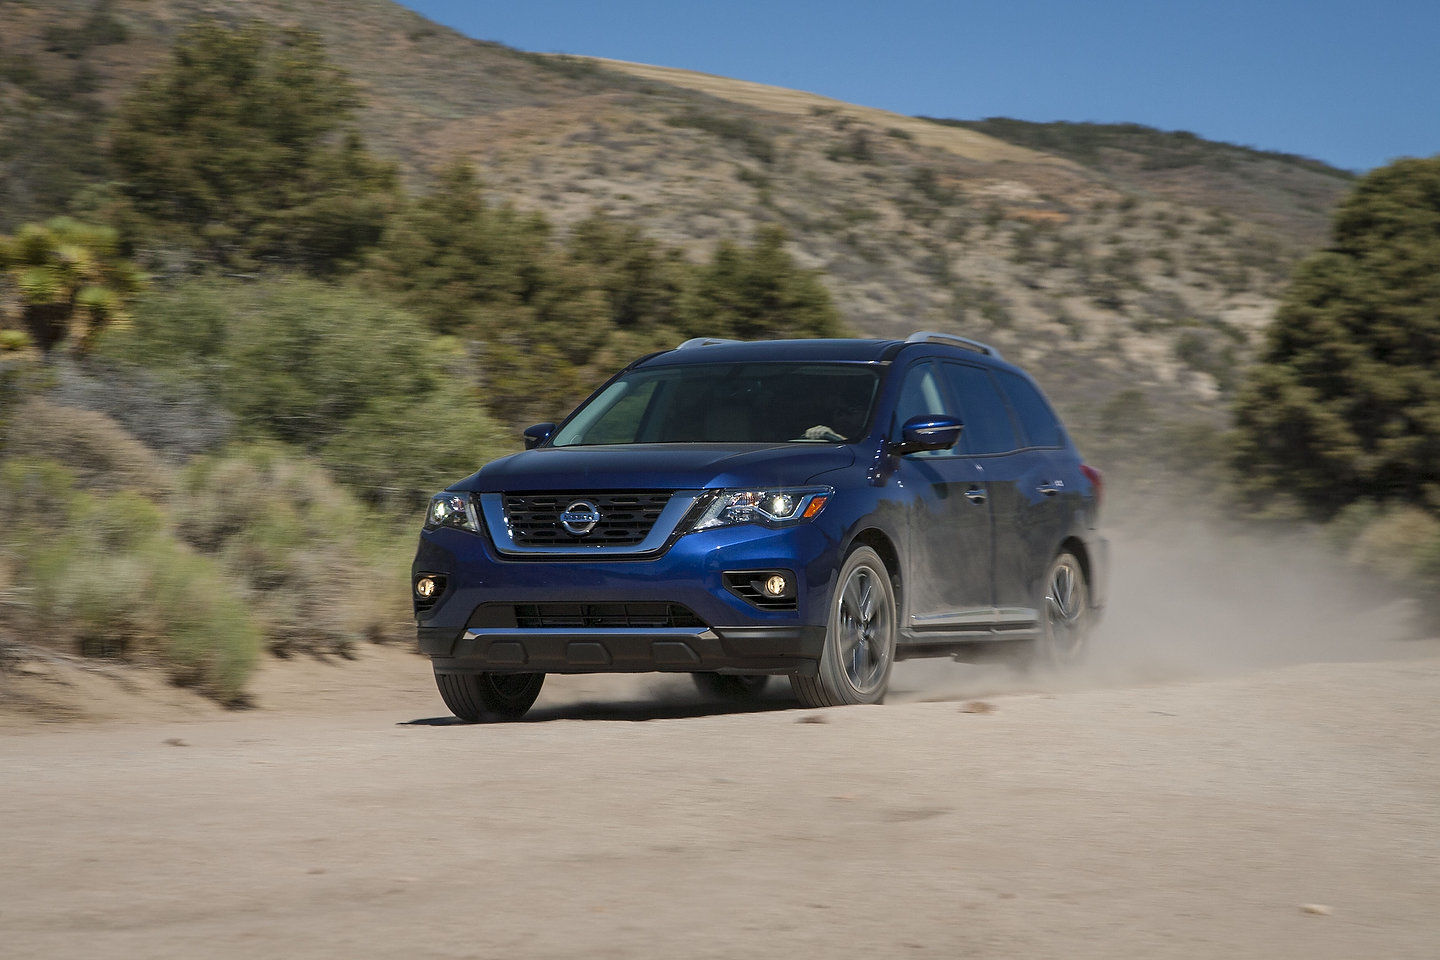 The 2019 Nissan Pathfinder is your partner in this adventure we call life